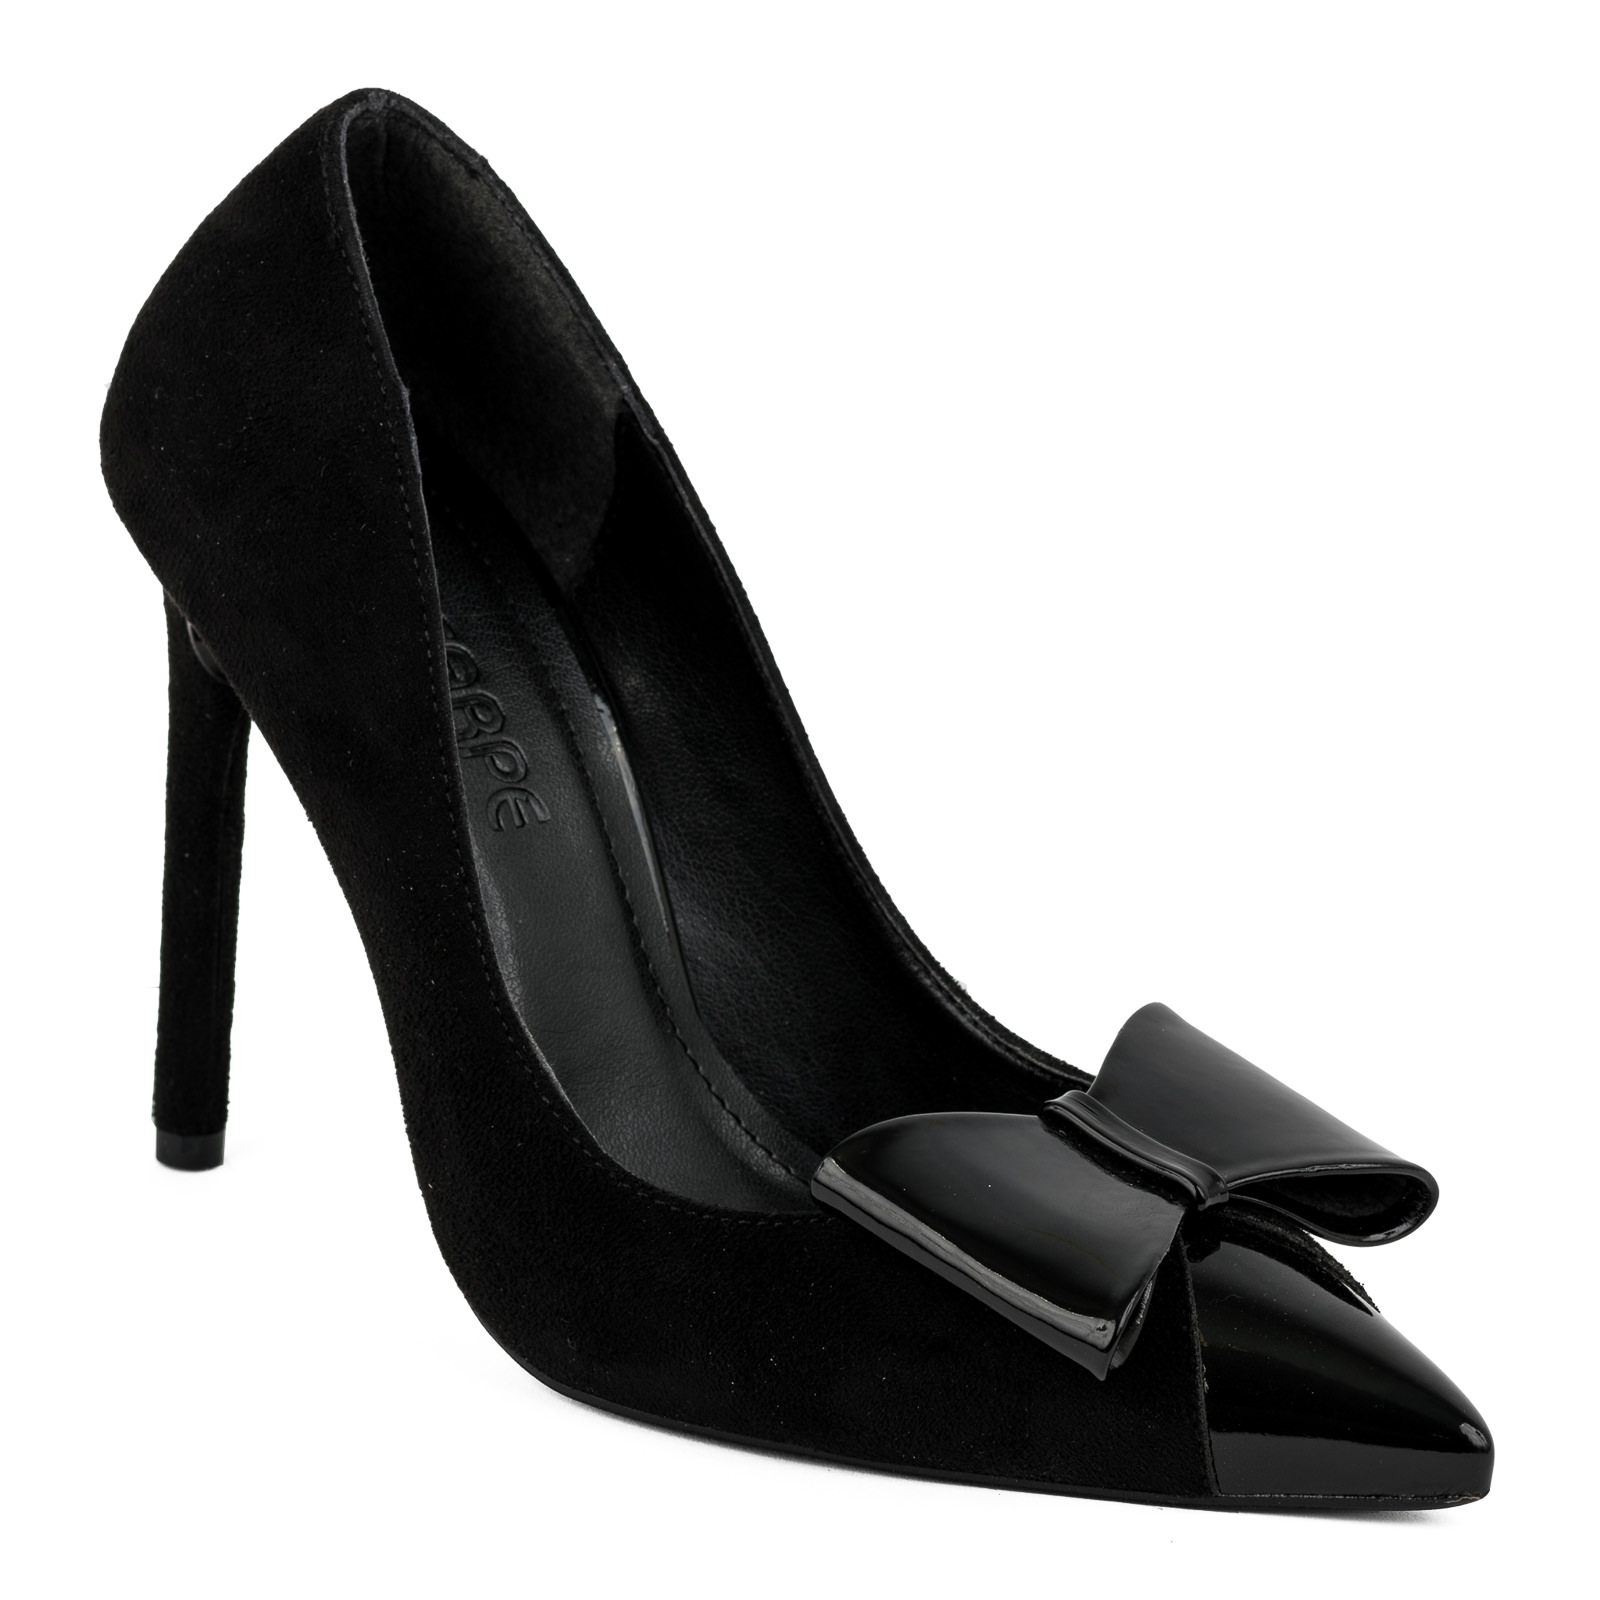 VELOUR POINTED STILETTO SHOES WITH THIN HEEL AND BOW - BLACK